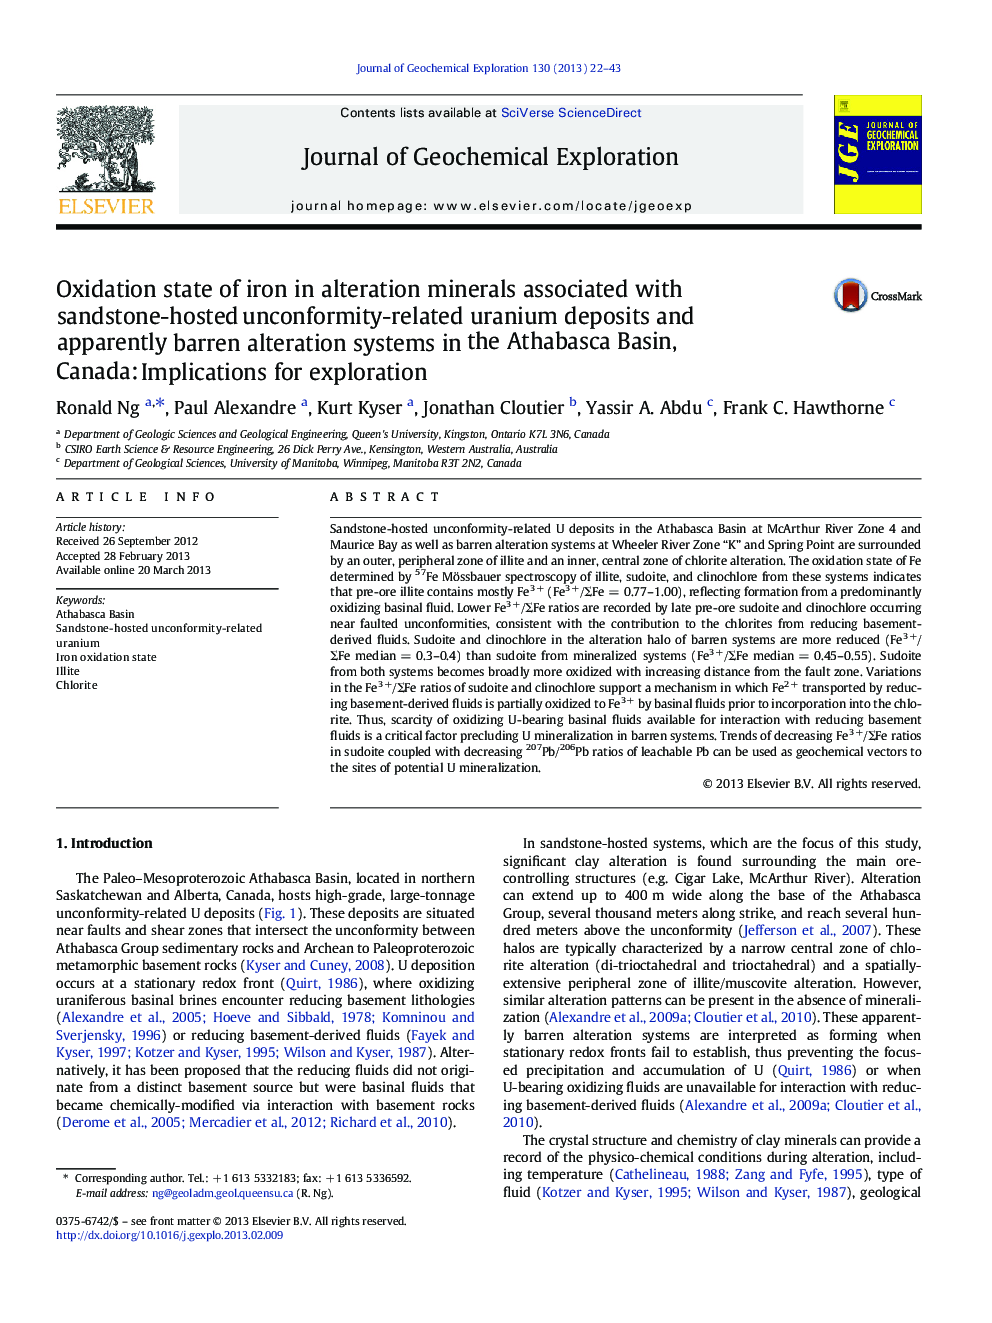 Oxidation state of iron in alteration minerals associated with sandstone-hosted unconformity-related uranium deposits and apparently barren alteration systems in the Athabasca Basin, Canada: Implications for exploration